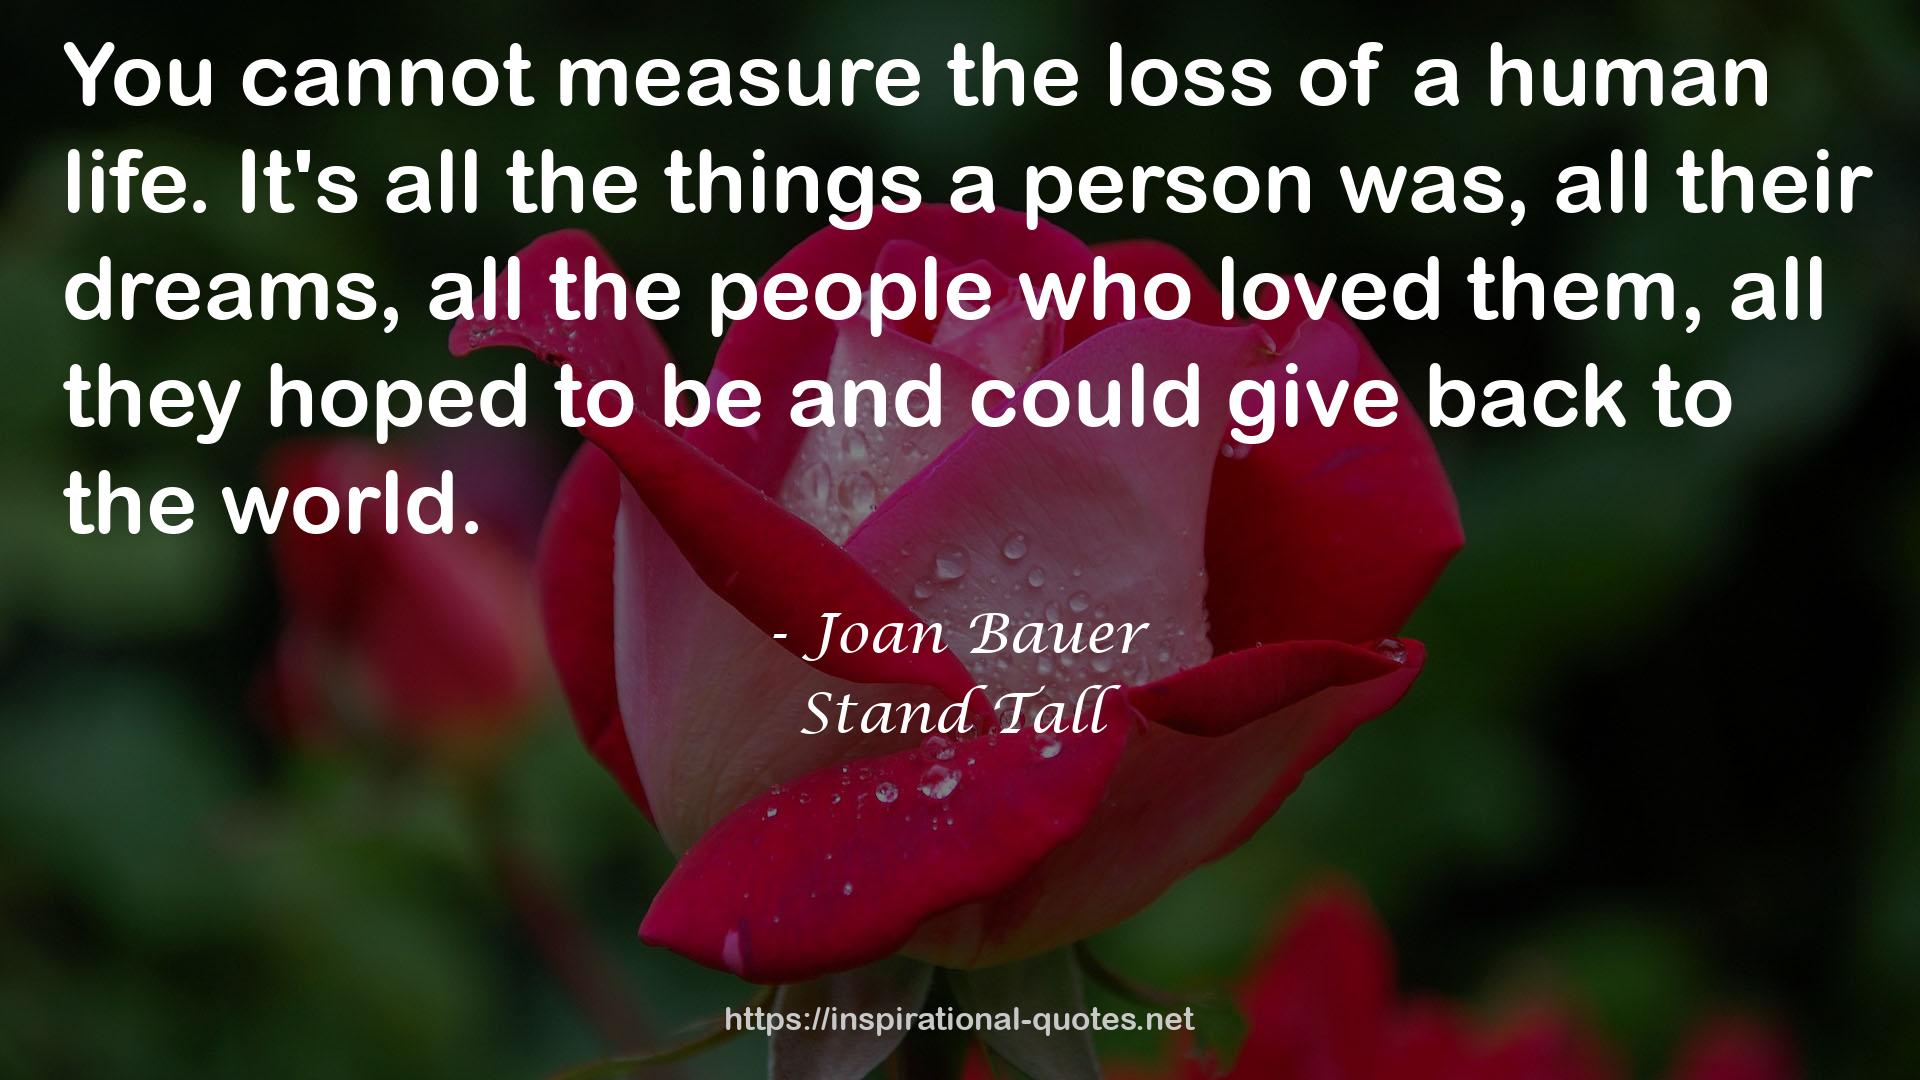 Stand Tall QUOTES